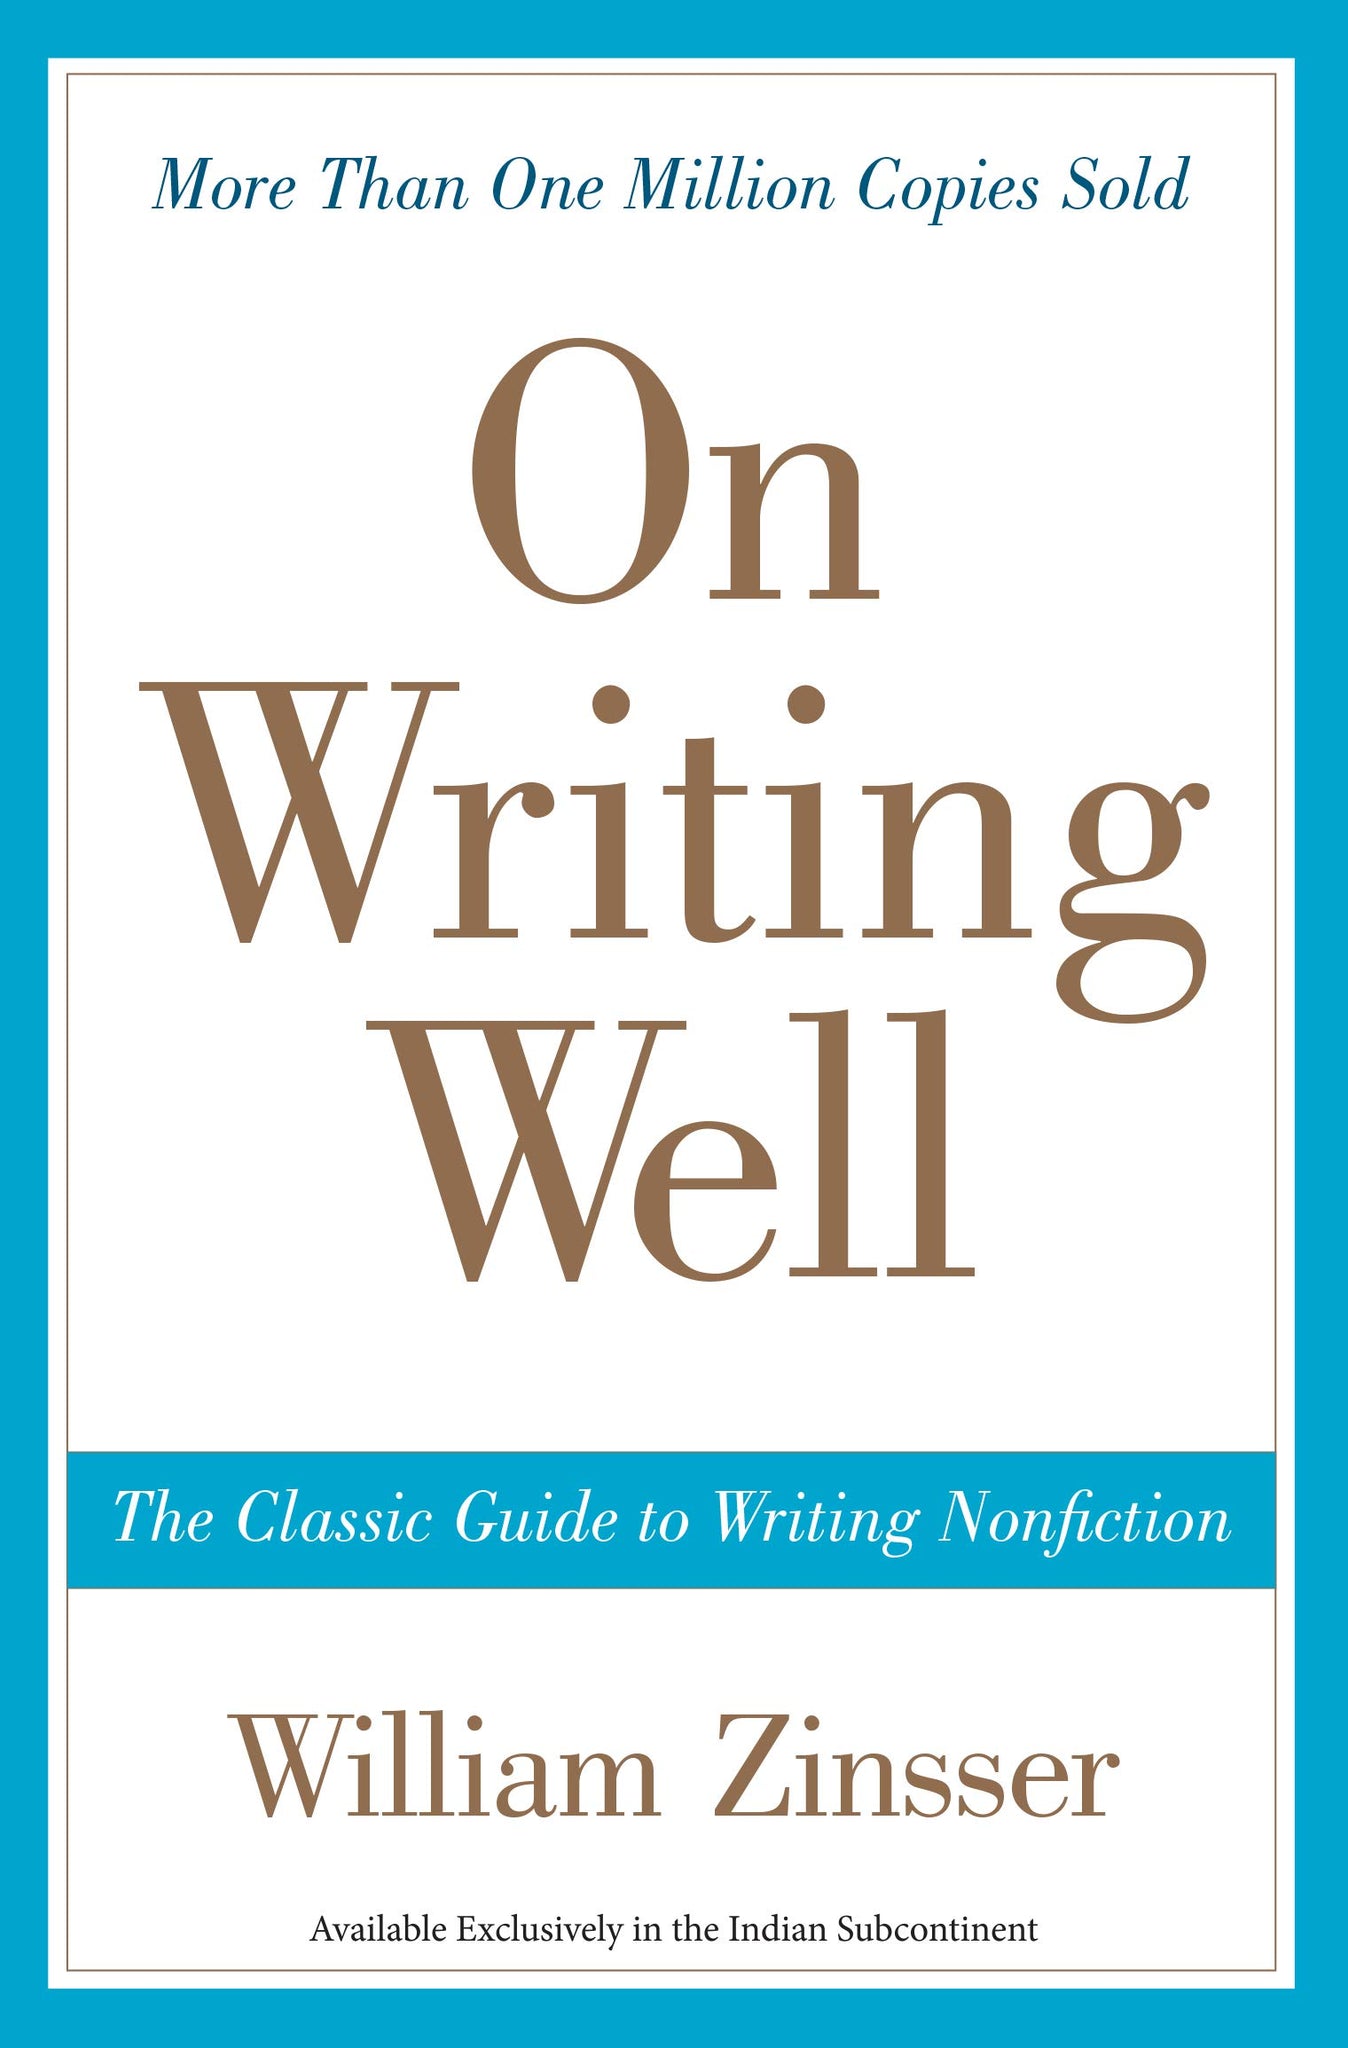 On Writing Well: The Classic Guide to Writing Nonfiction